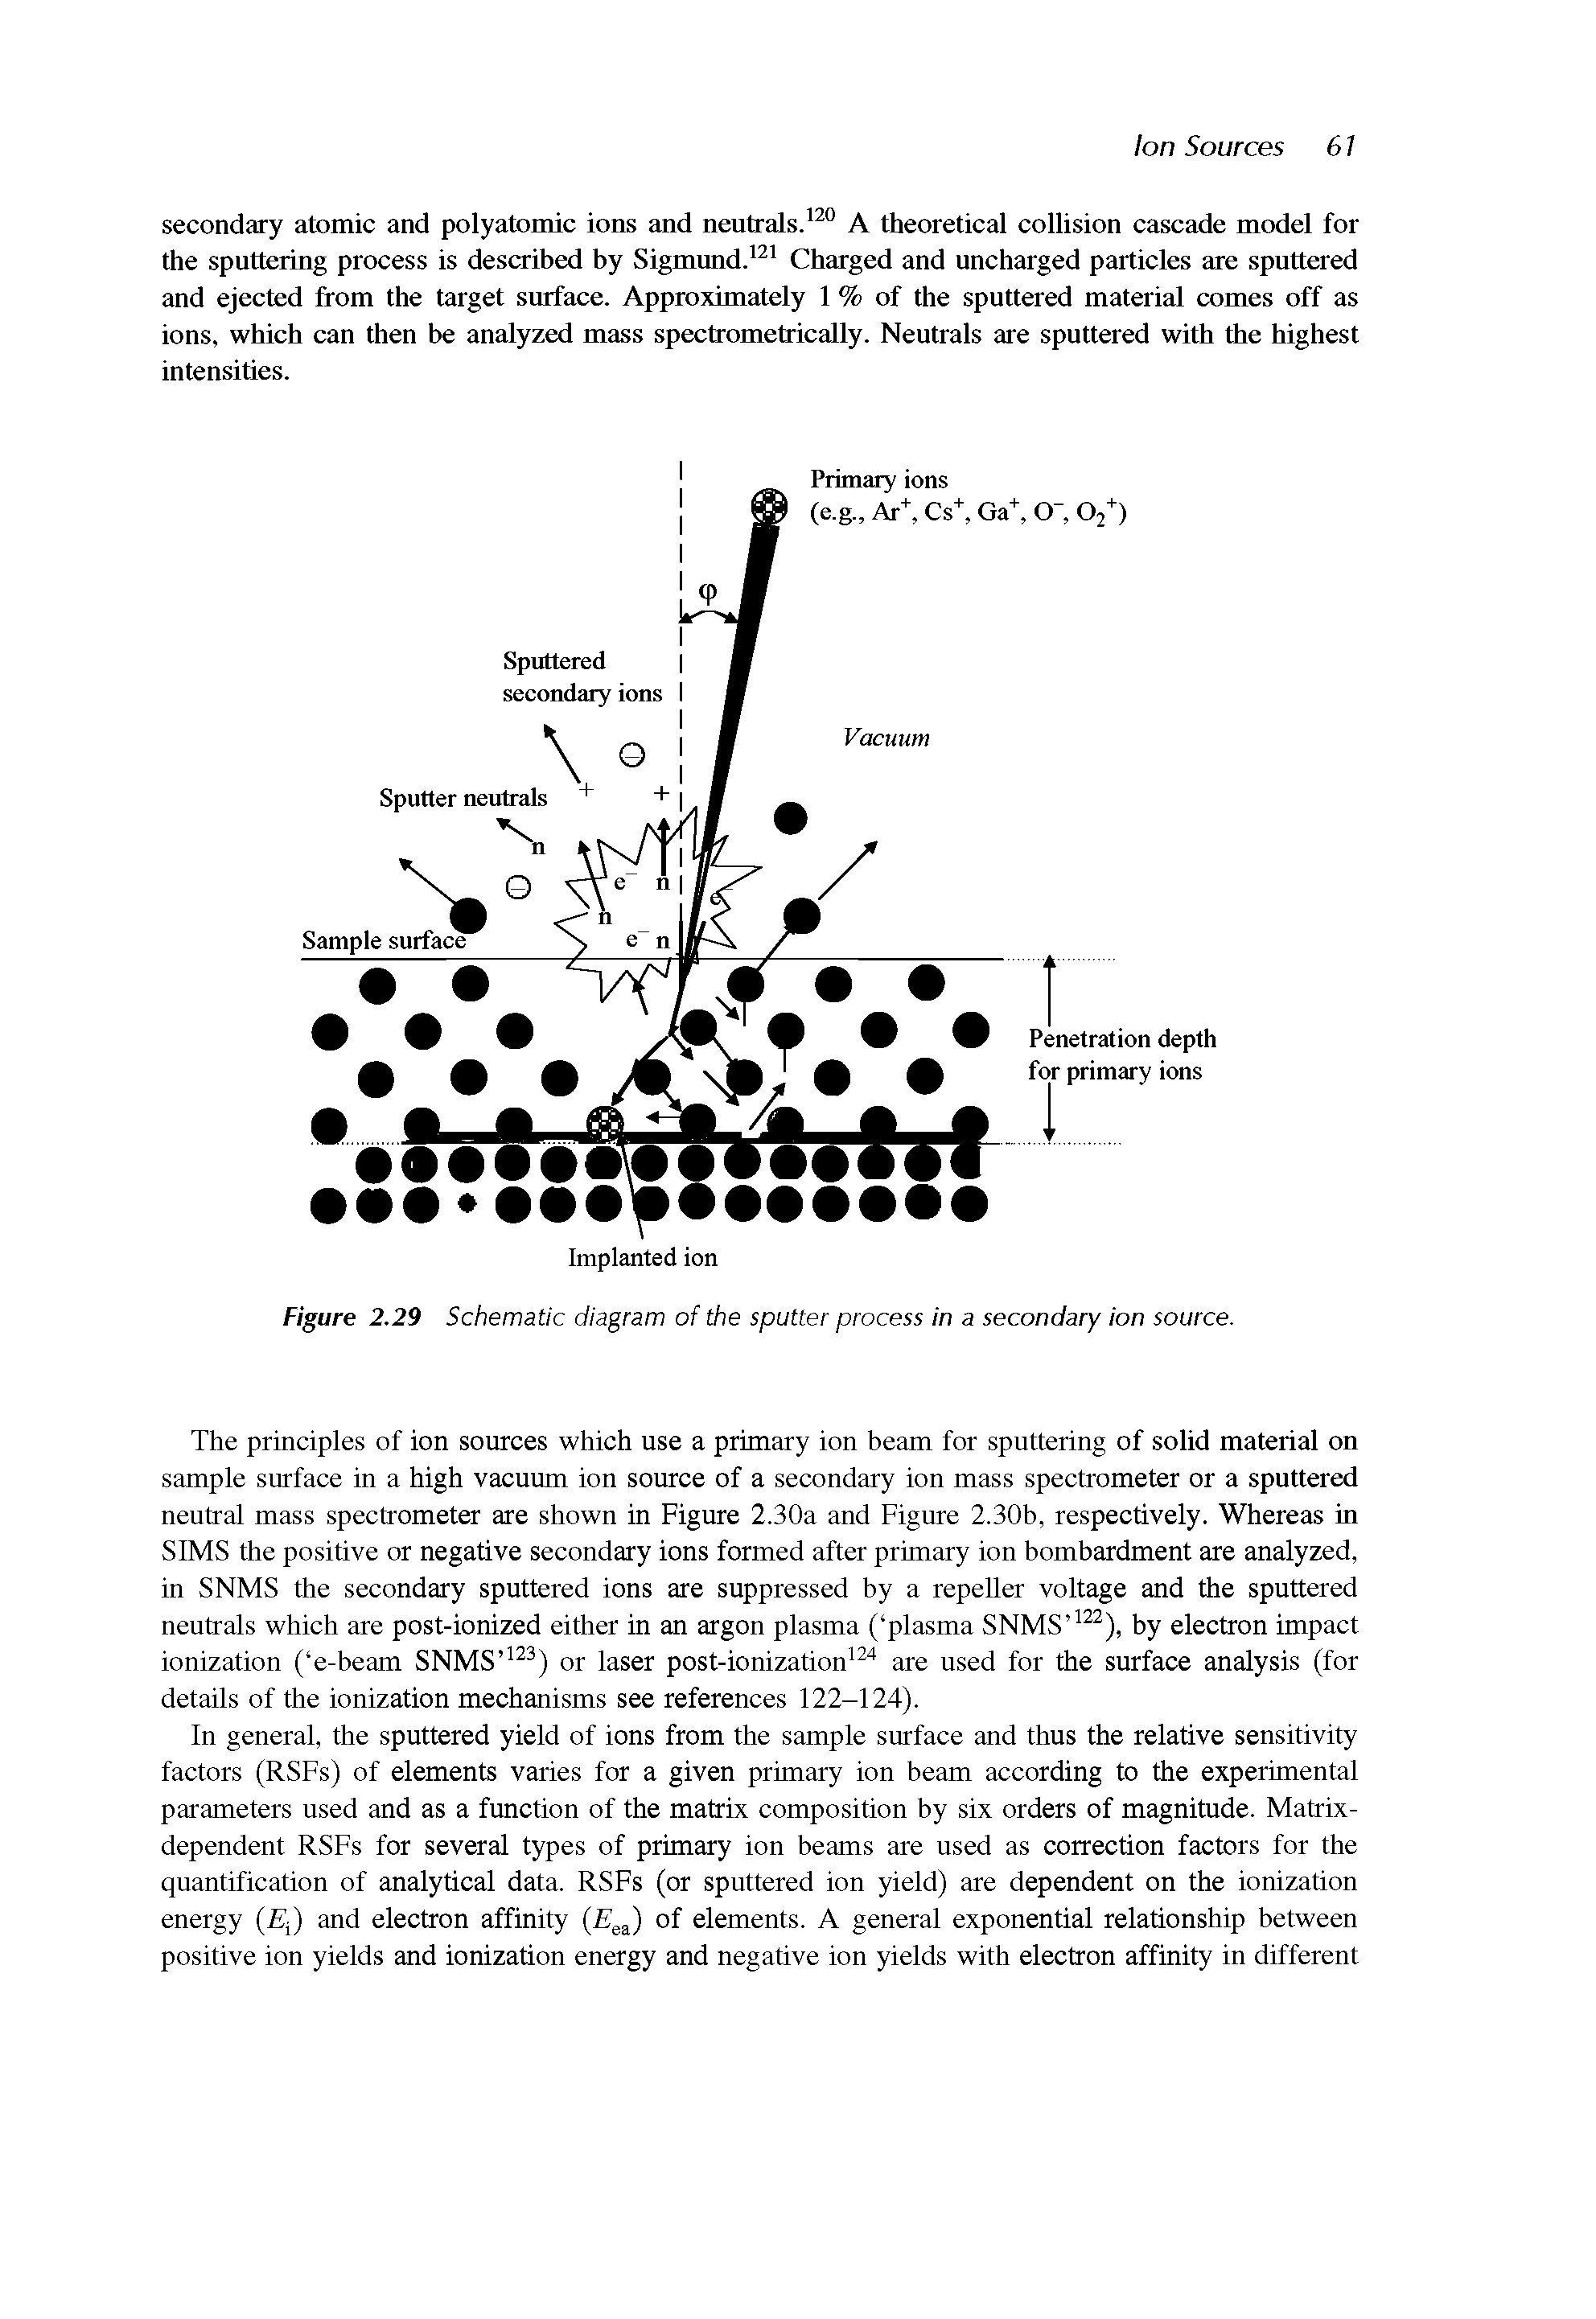 Figure 2.29 Schematic diagram of the sputter process in a secondary ion source.